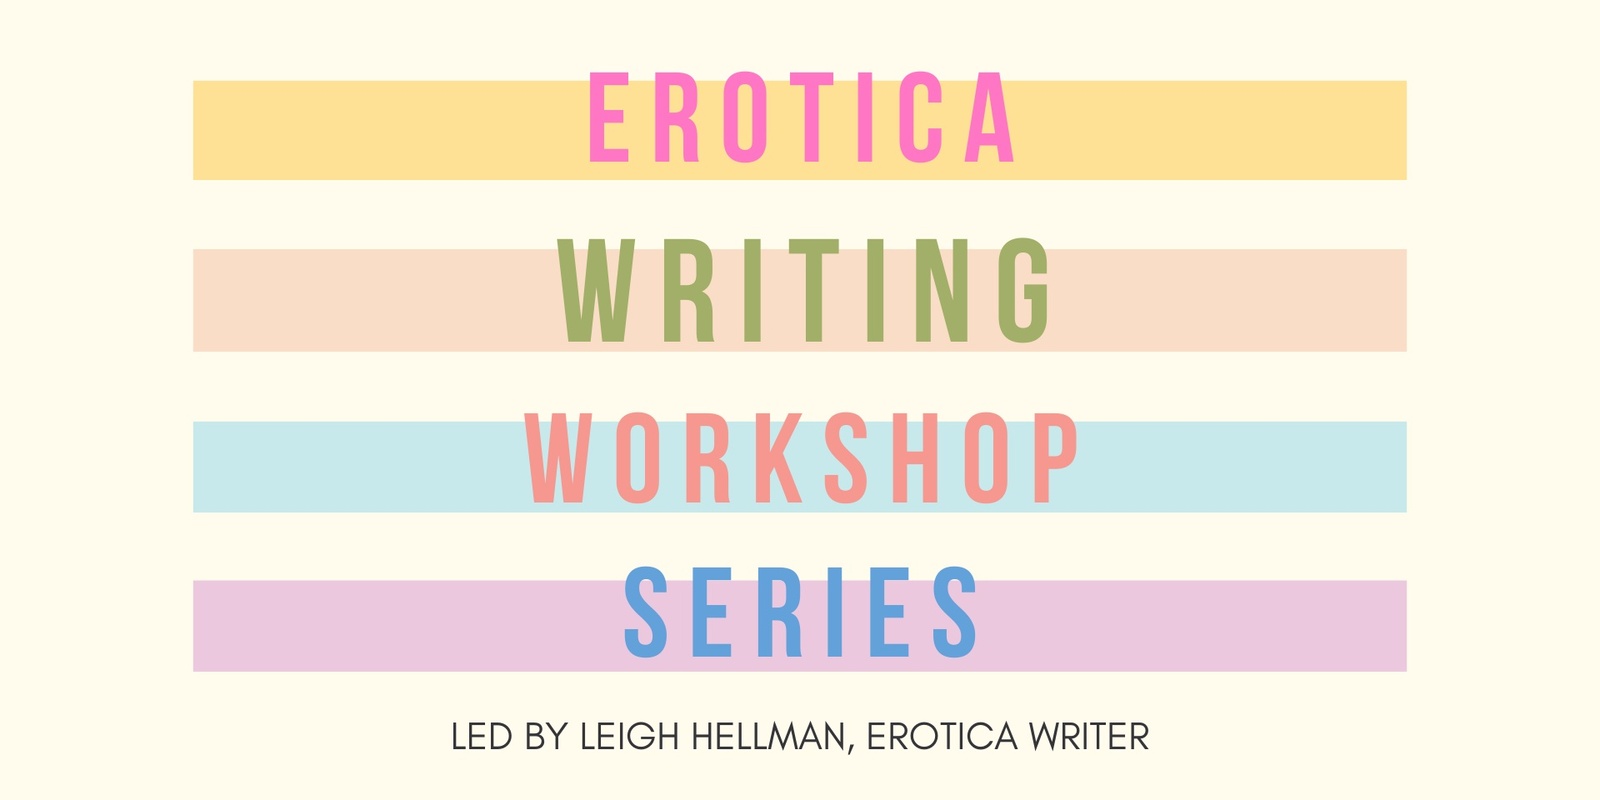 Banner image for Erotica Writing Workshop Series